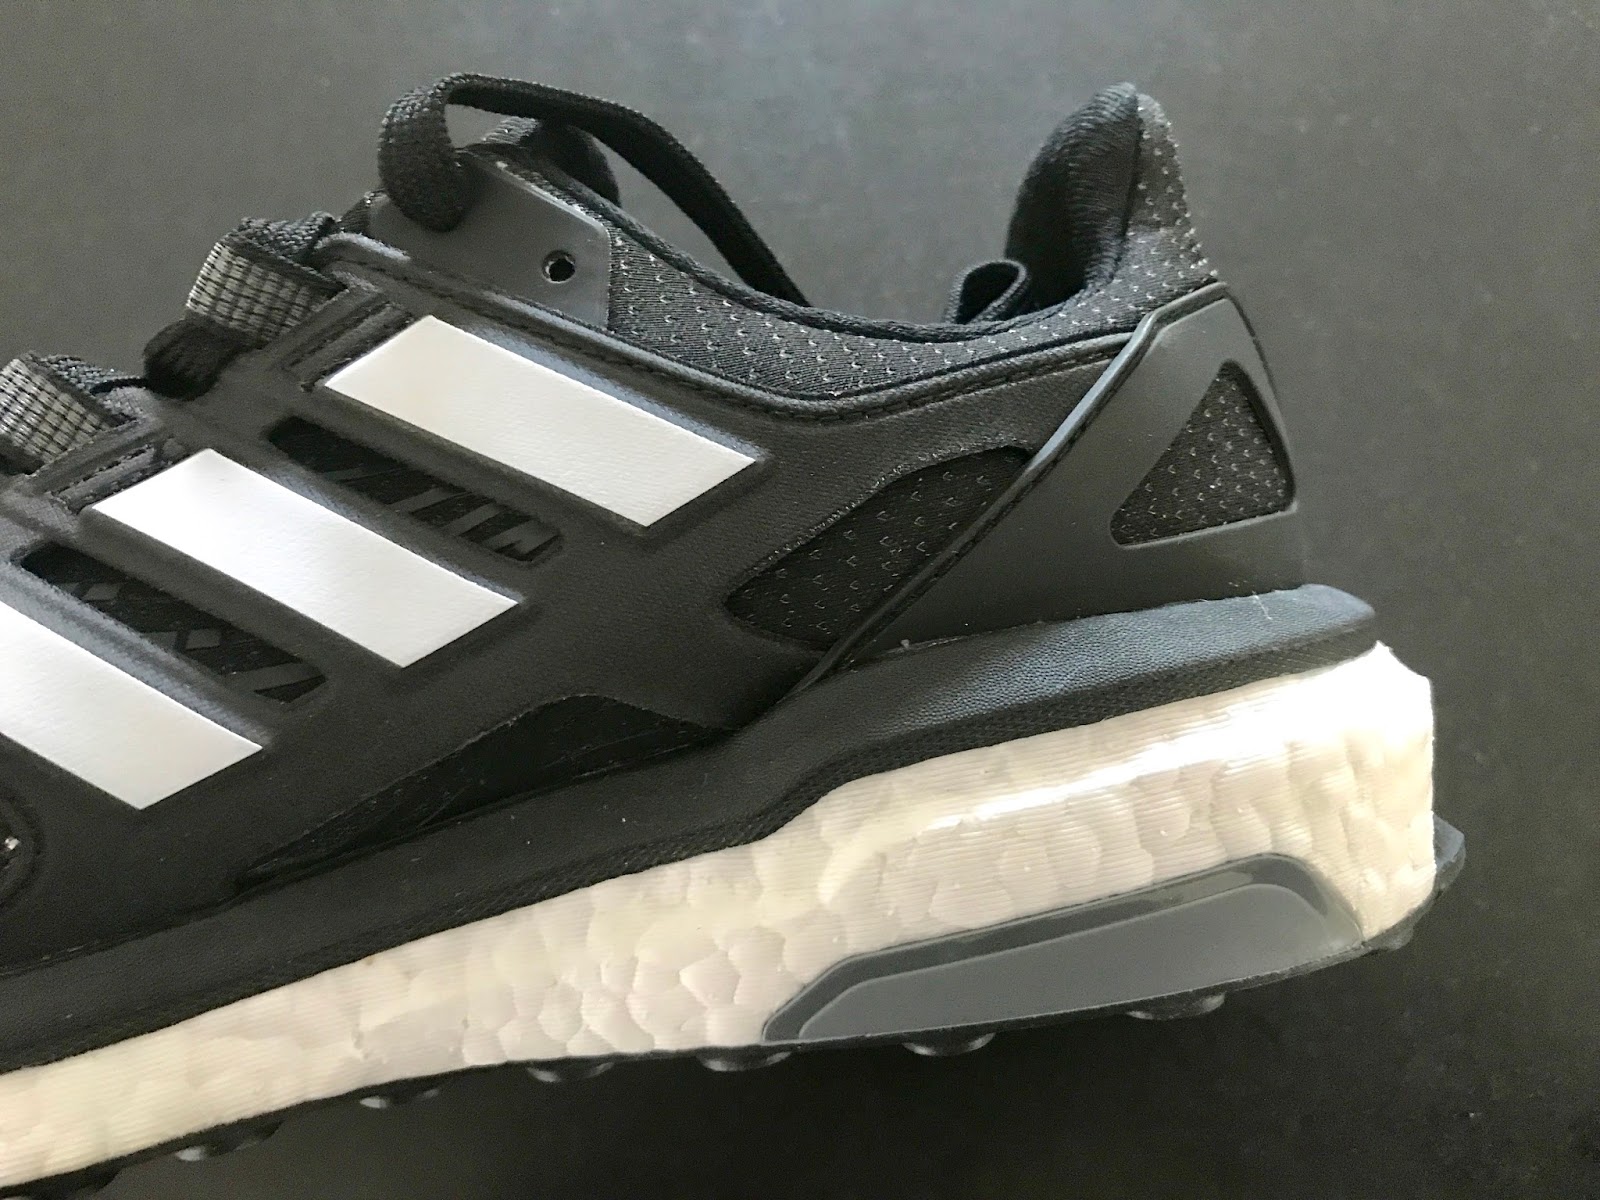 Road Trail Run: 2017 adidas Energy Boost (4): A Luxury German SUV. and Stats Deceiving!